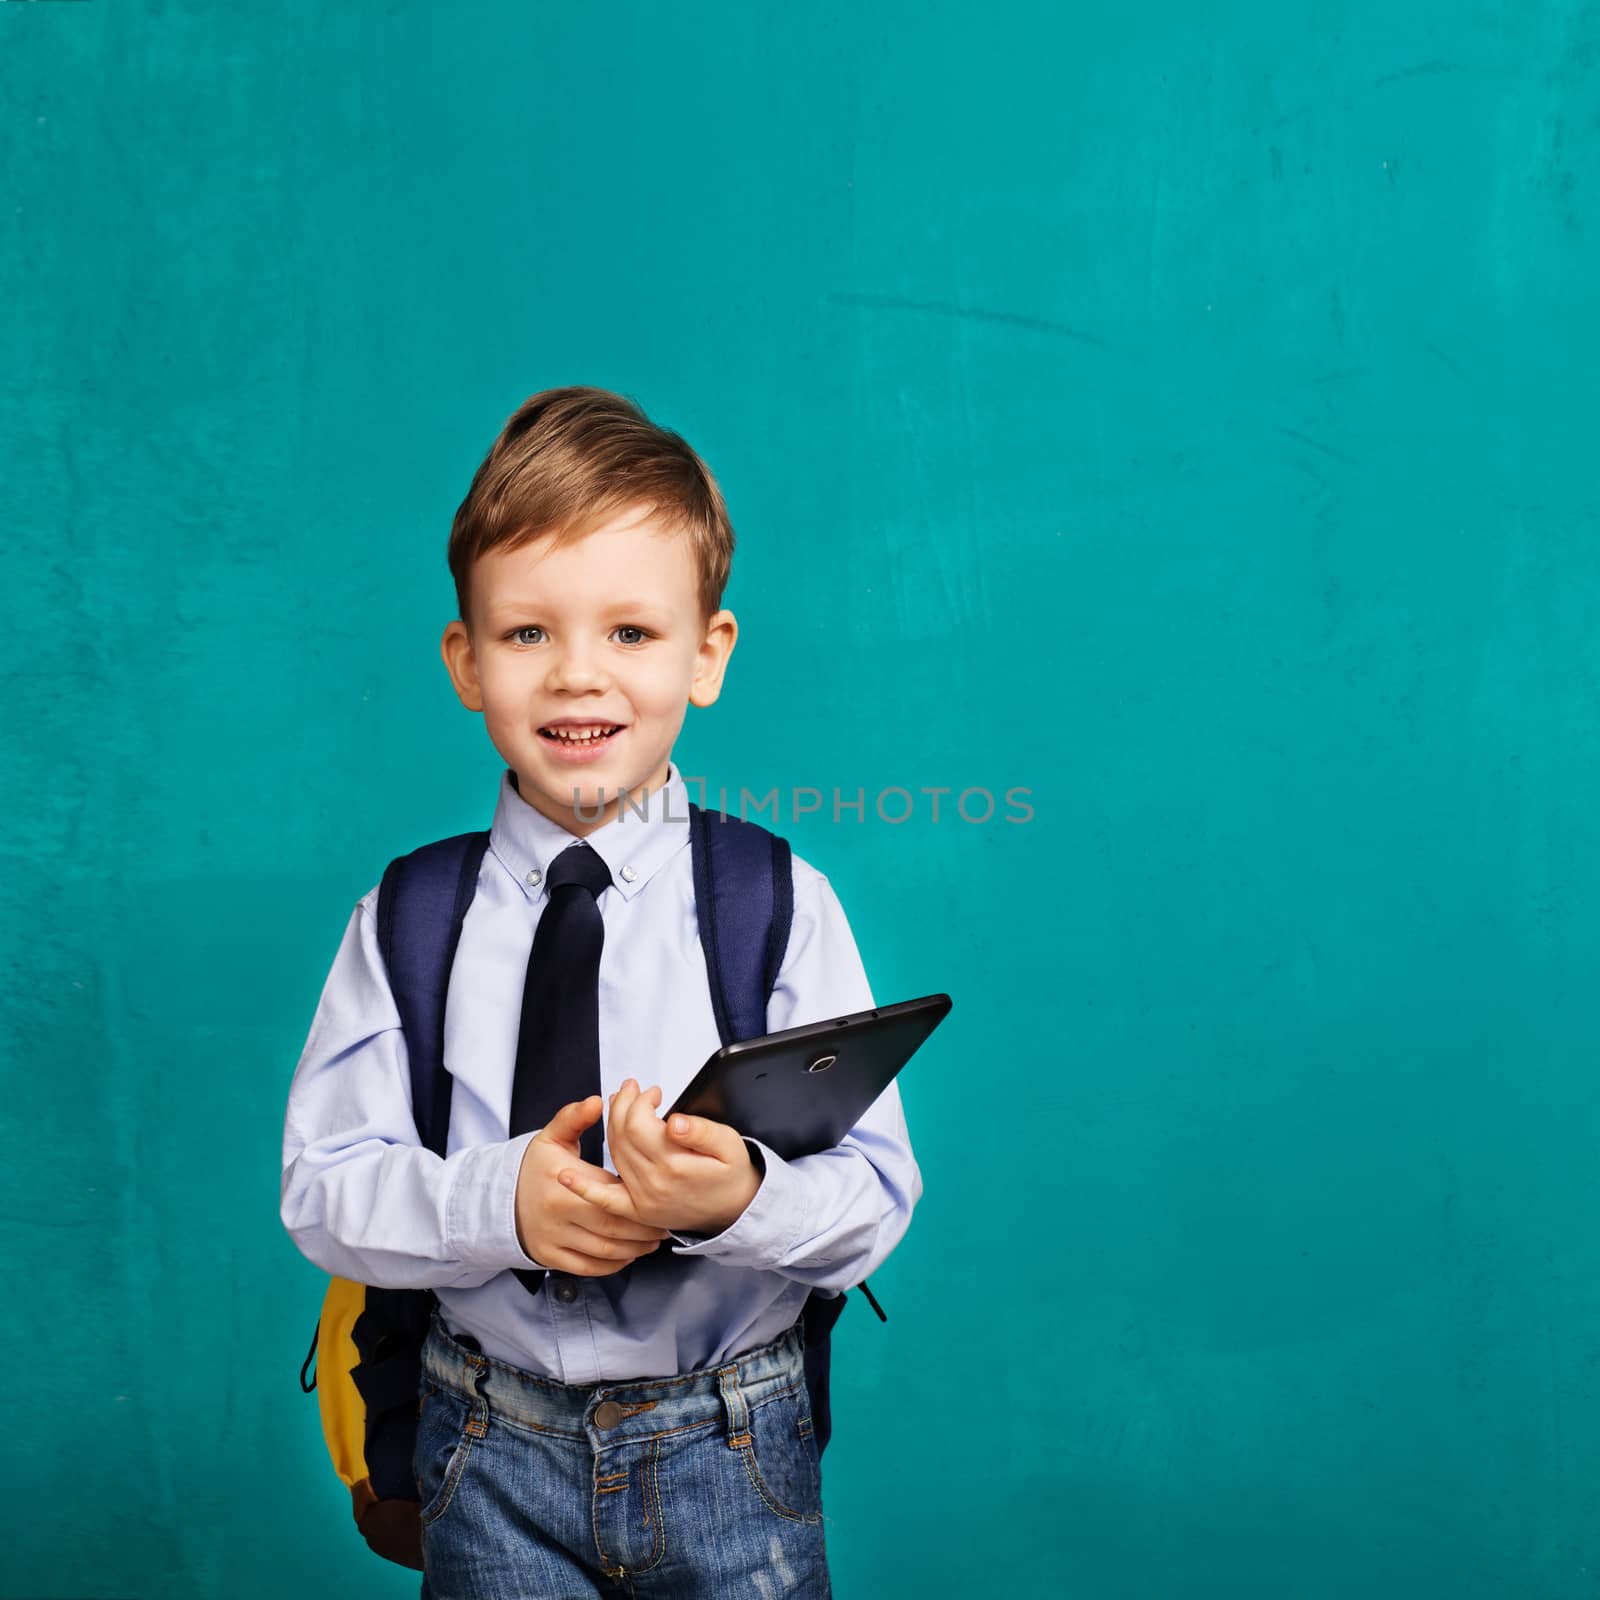 Cheerful smiling little boy with big backpack holding digital tablet against blue background. Looking at camera. School concept. Back to School